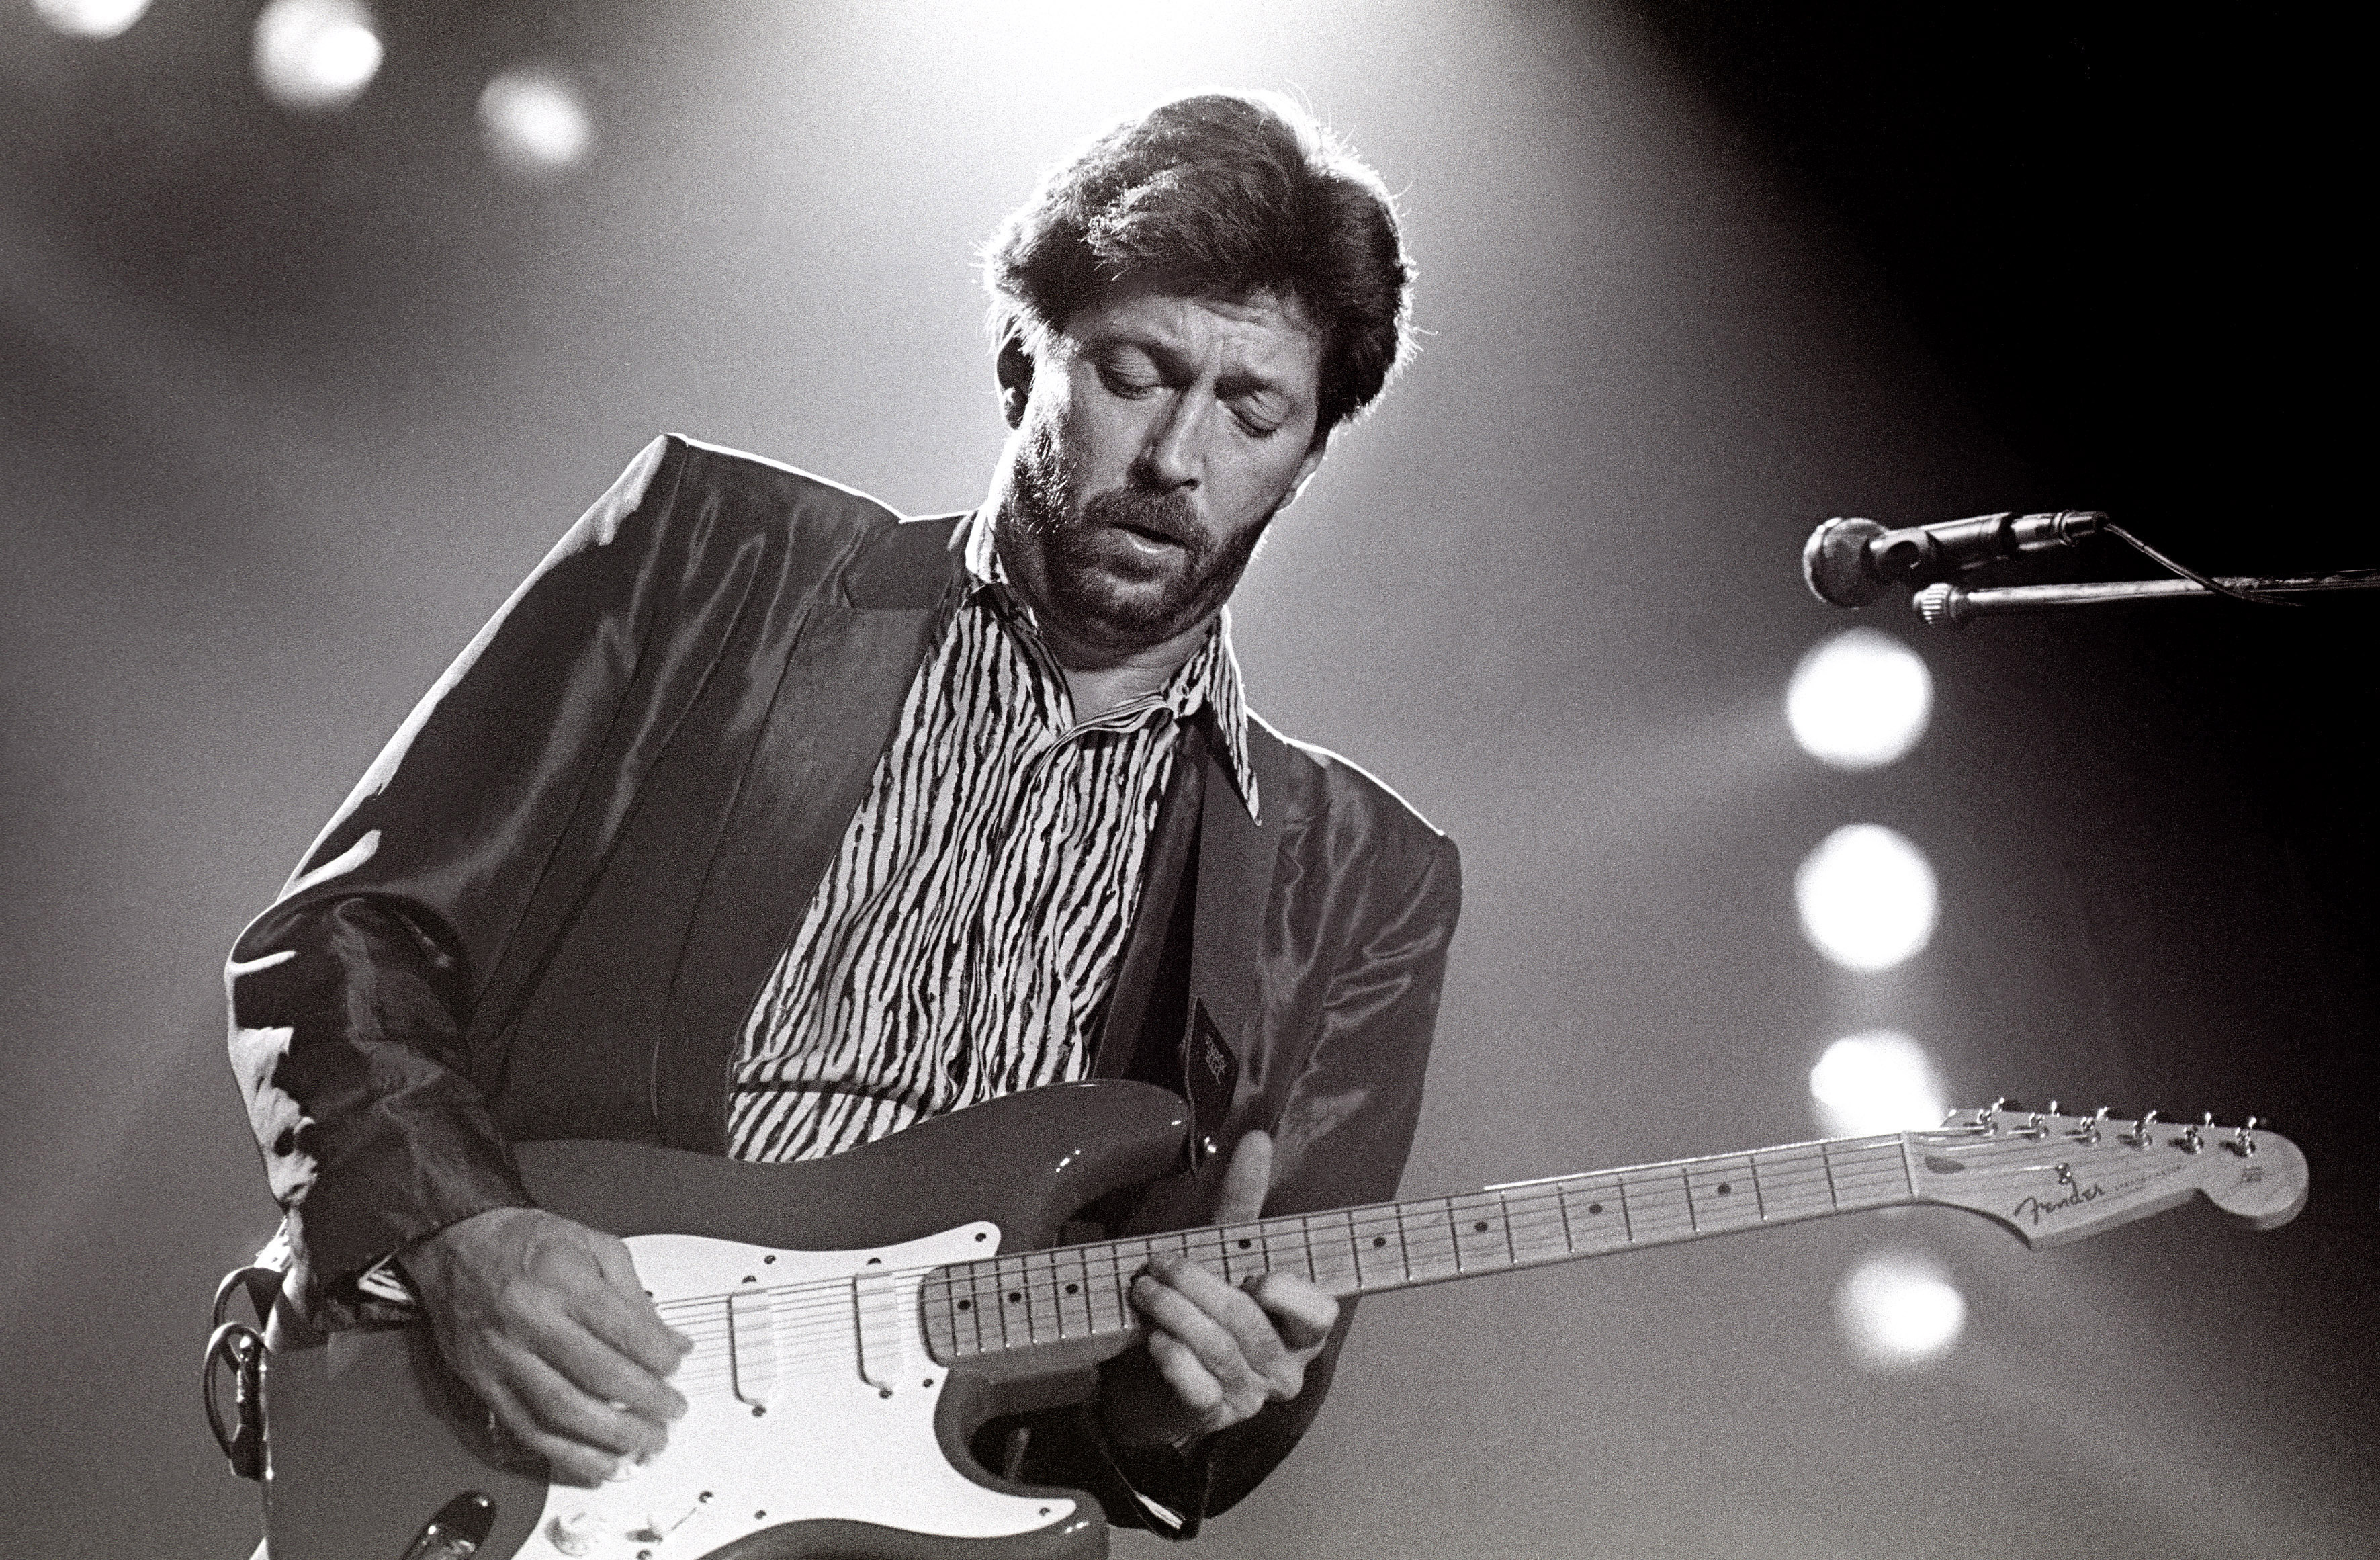 Eric Clapton Fluent in every blues style, Clapton is probably best known as the king of the Tulsa Sound. He's also among the most melodic of guitarists, using his solos to move a song along instead of stopping it cold.